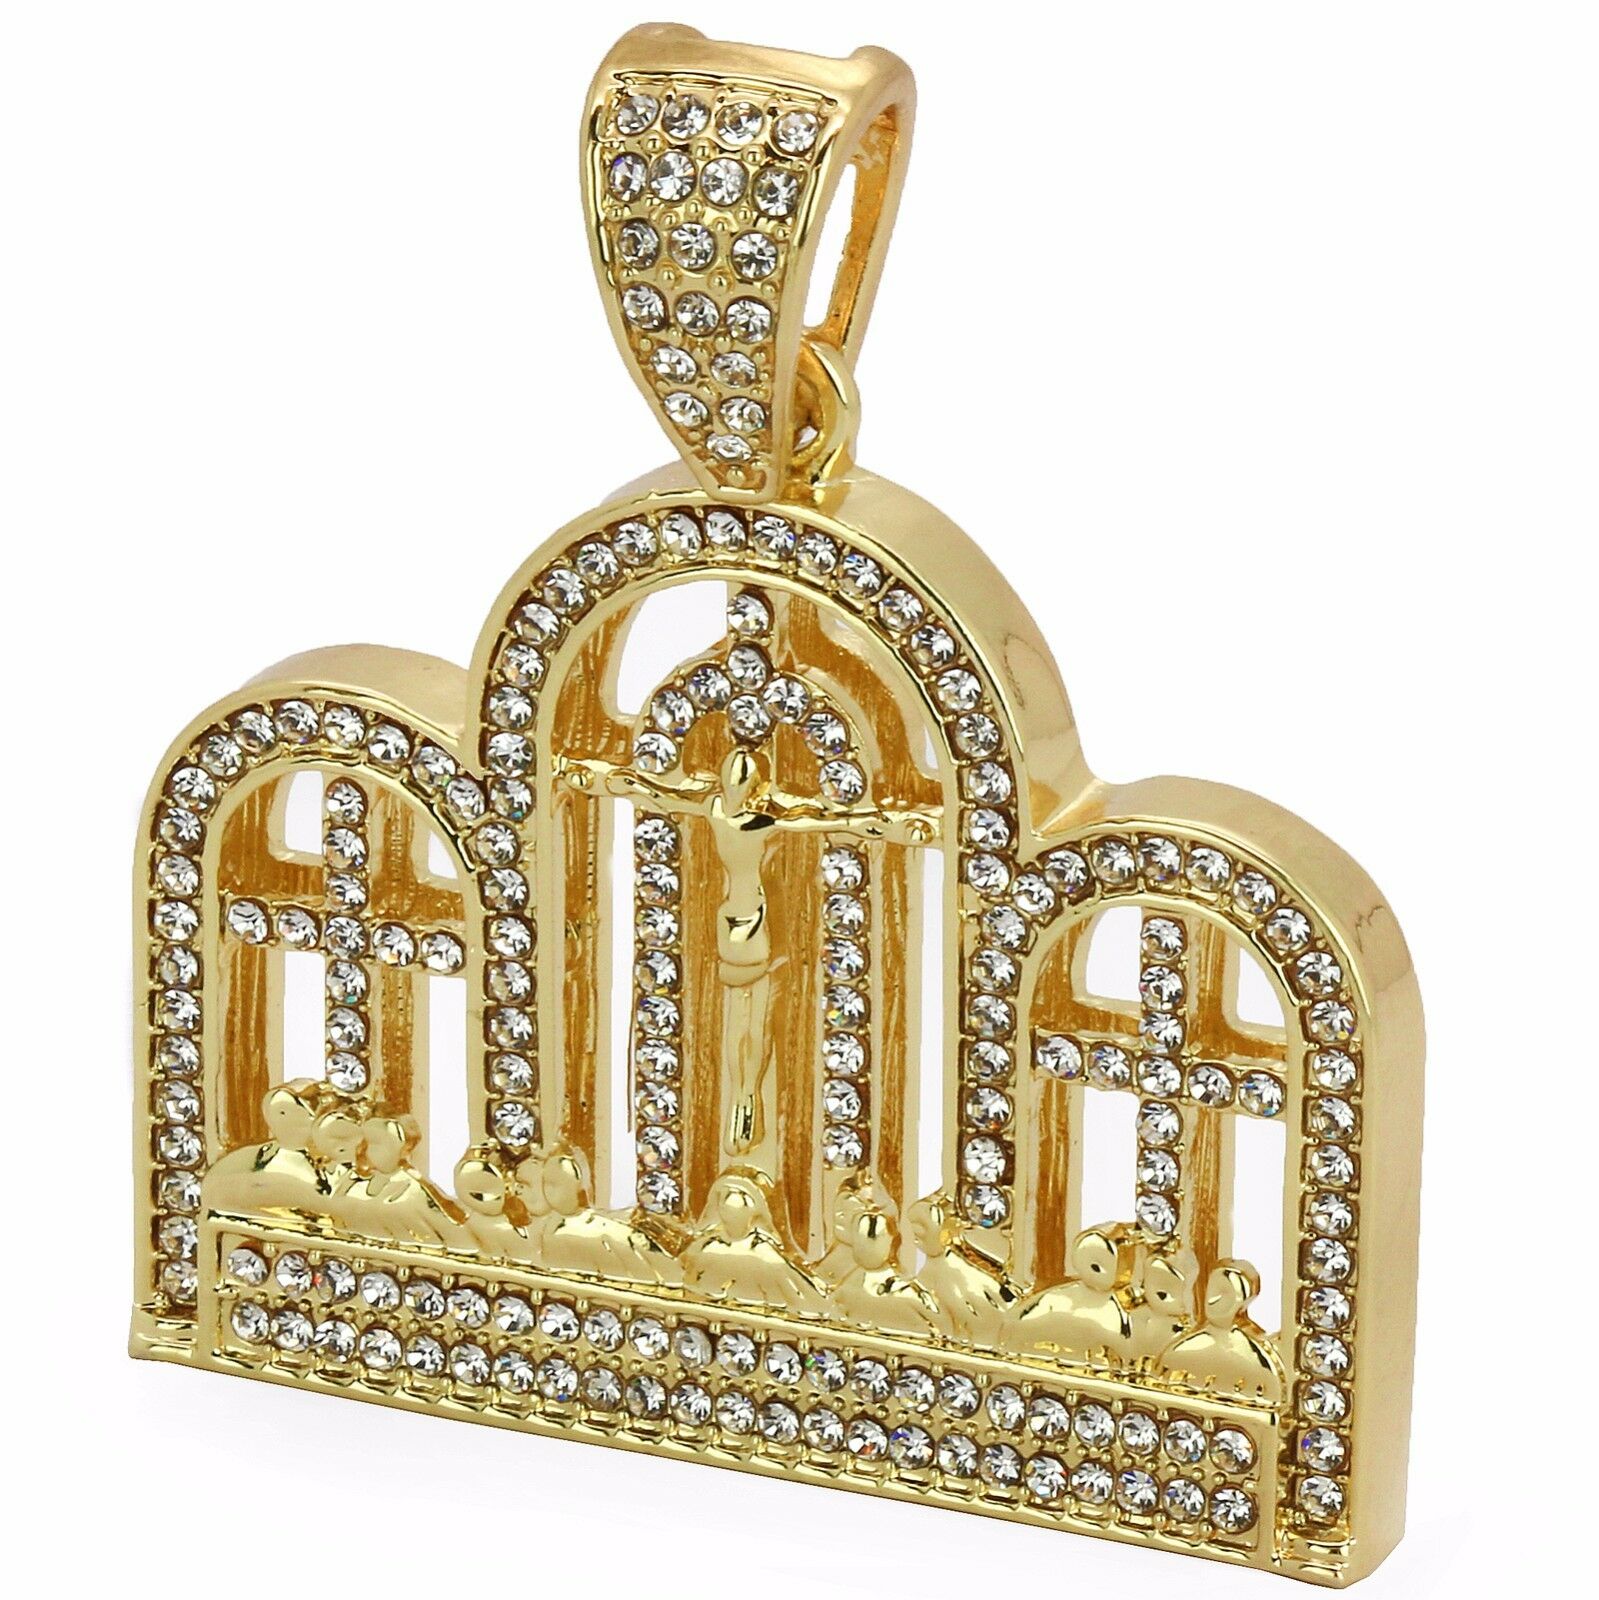 Gold Last Supper NECKLACE